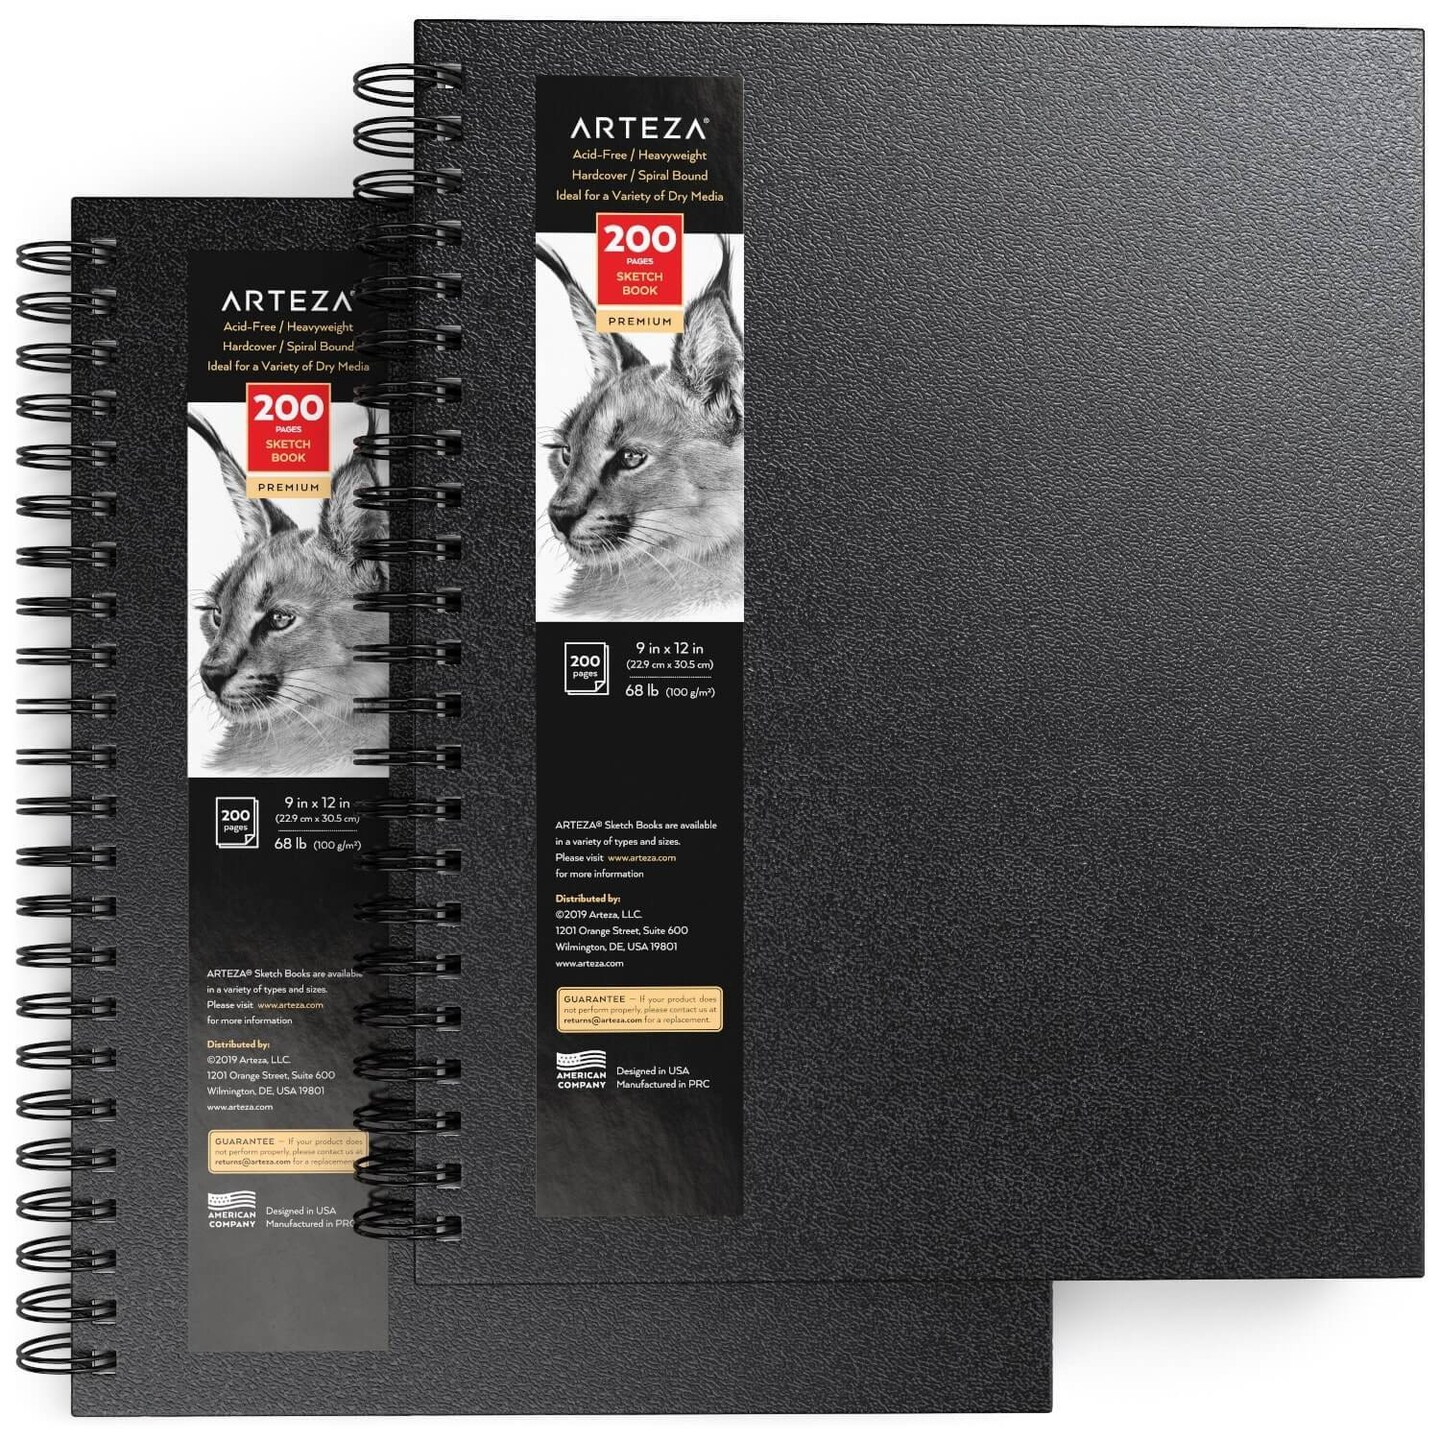 Arteza Gray Toned Sketchbook, 9x12, 50 Sheets of Drawing Paper- 2 Pack 